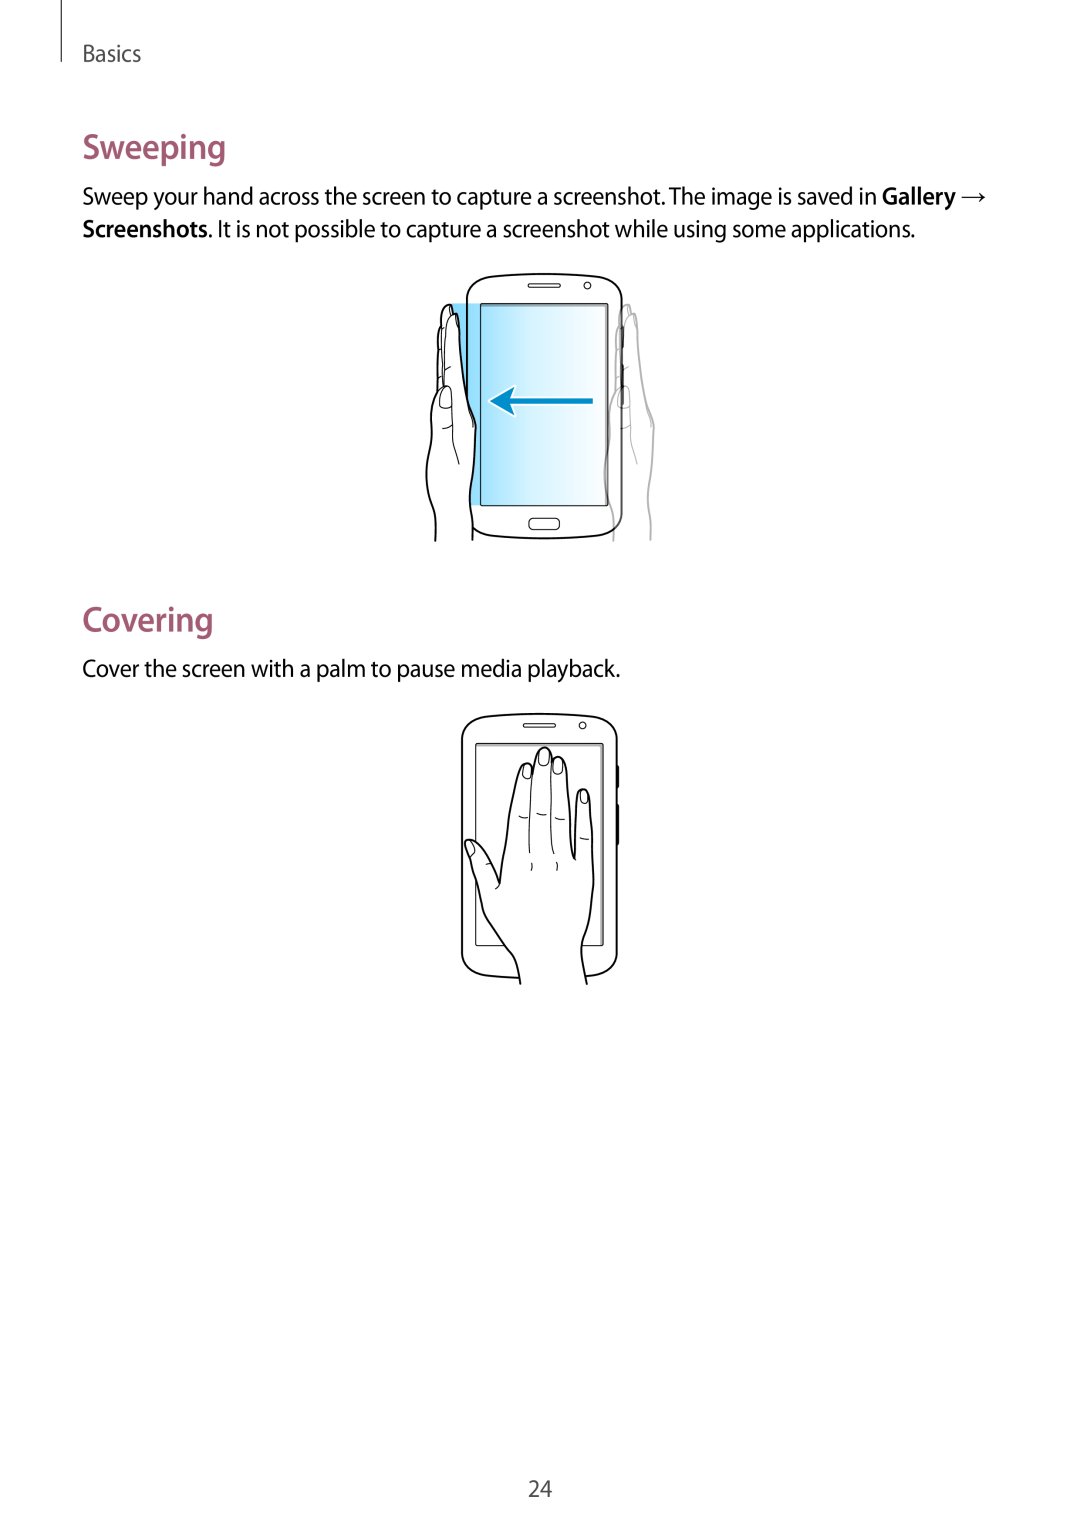 Samsung GT-N5100 user manual Sweeping, Covering, Basics, Cover the screen with a palm to pause media playback 